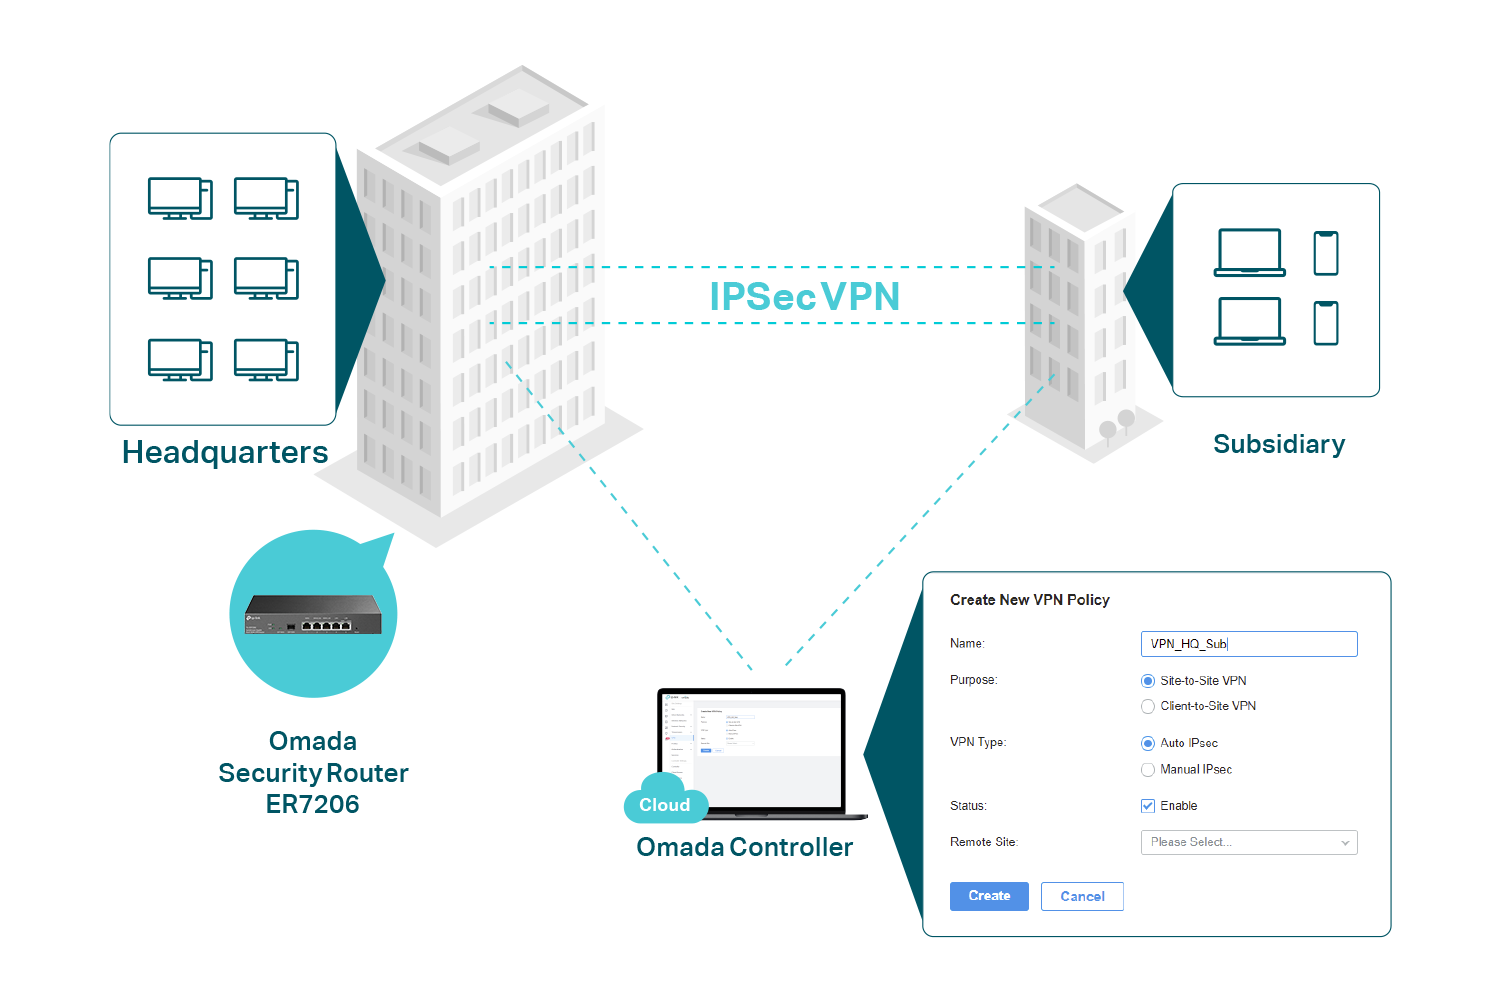 TP-Link VPN Omada Network Protection Increased Protection|Limited Wired SDN | Lifetime ER7206 | Firewall Balance|Lightning | Multi-WAN High-Performance (TL-ER7206) Router Capacity|SPI Integrated|Load